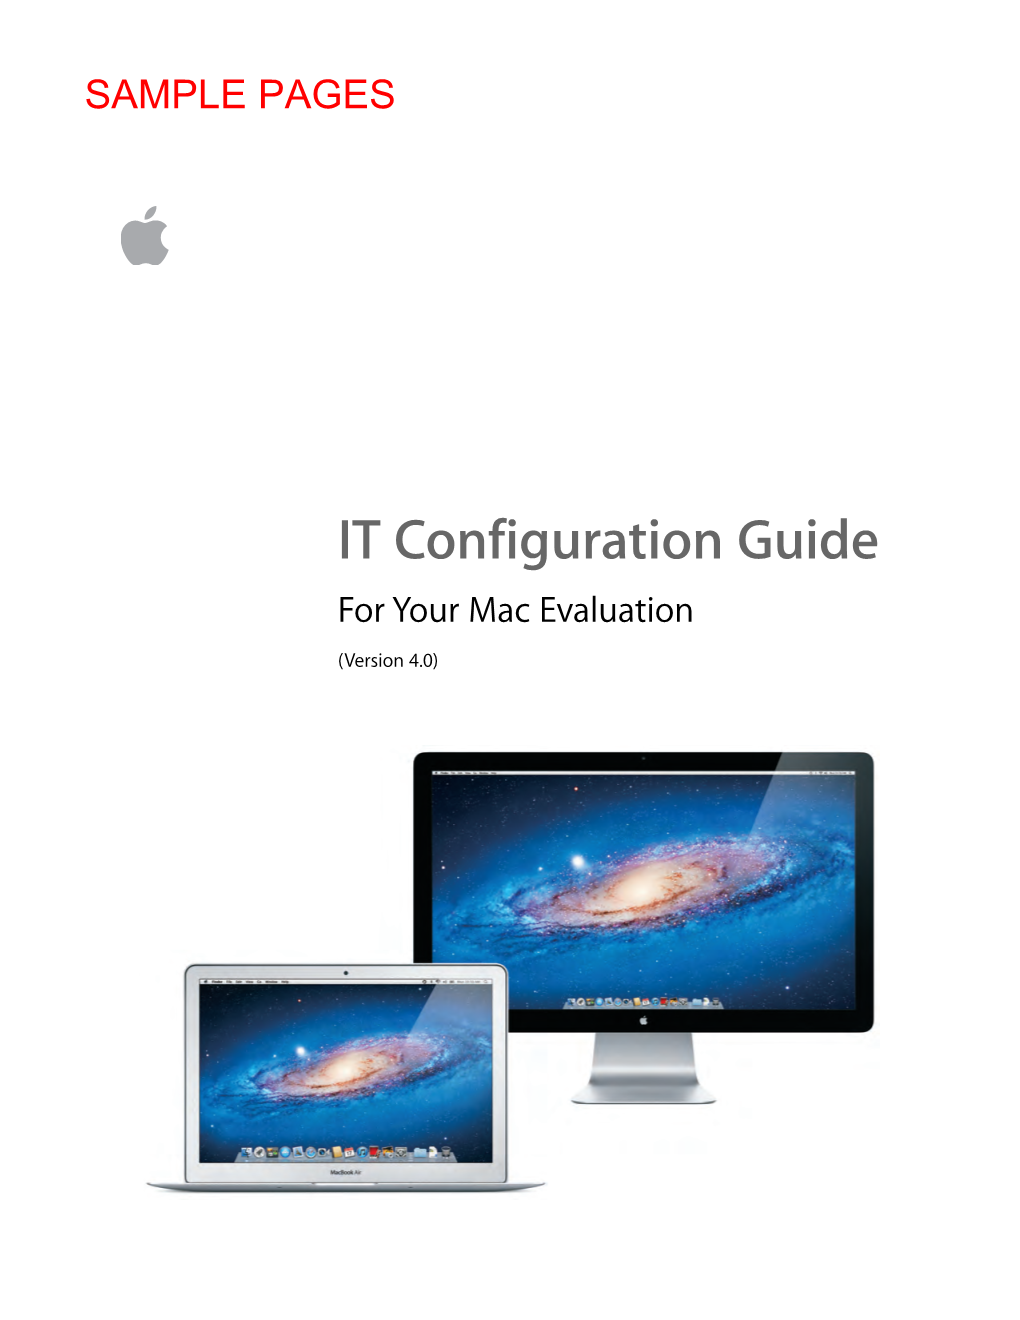 IT Configuration Guide for Your Mac Evaluation